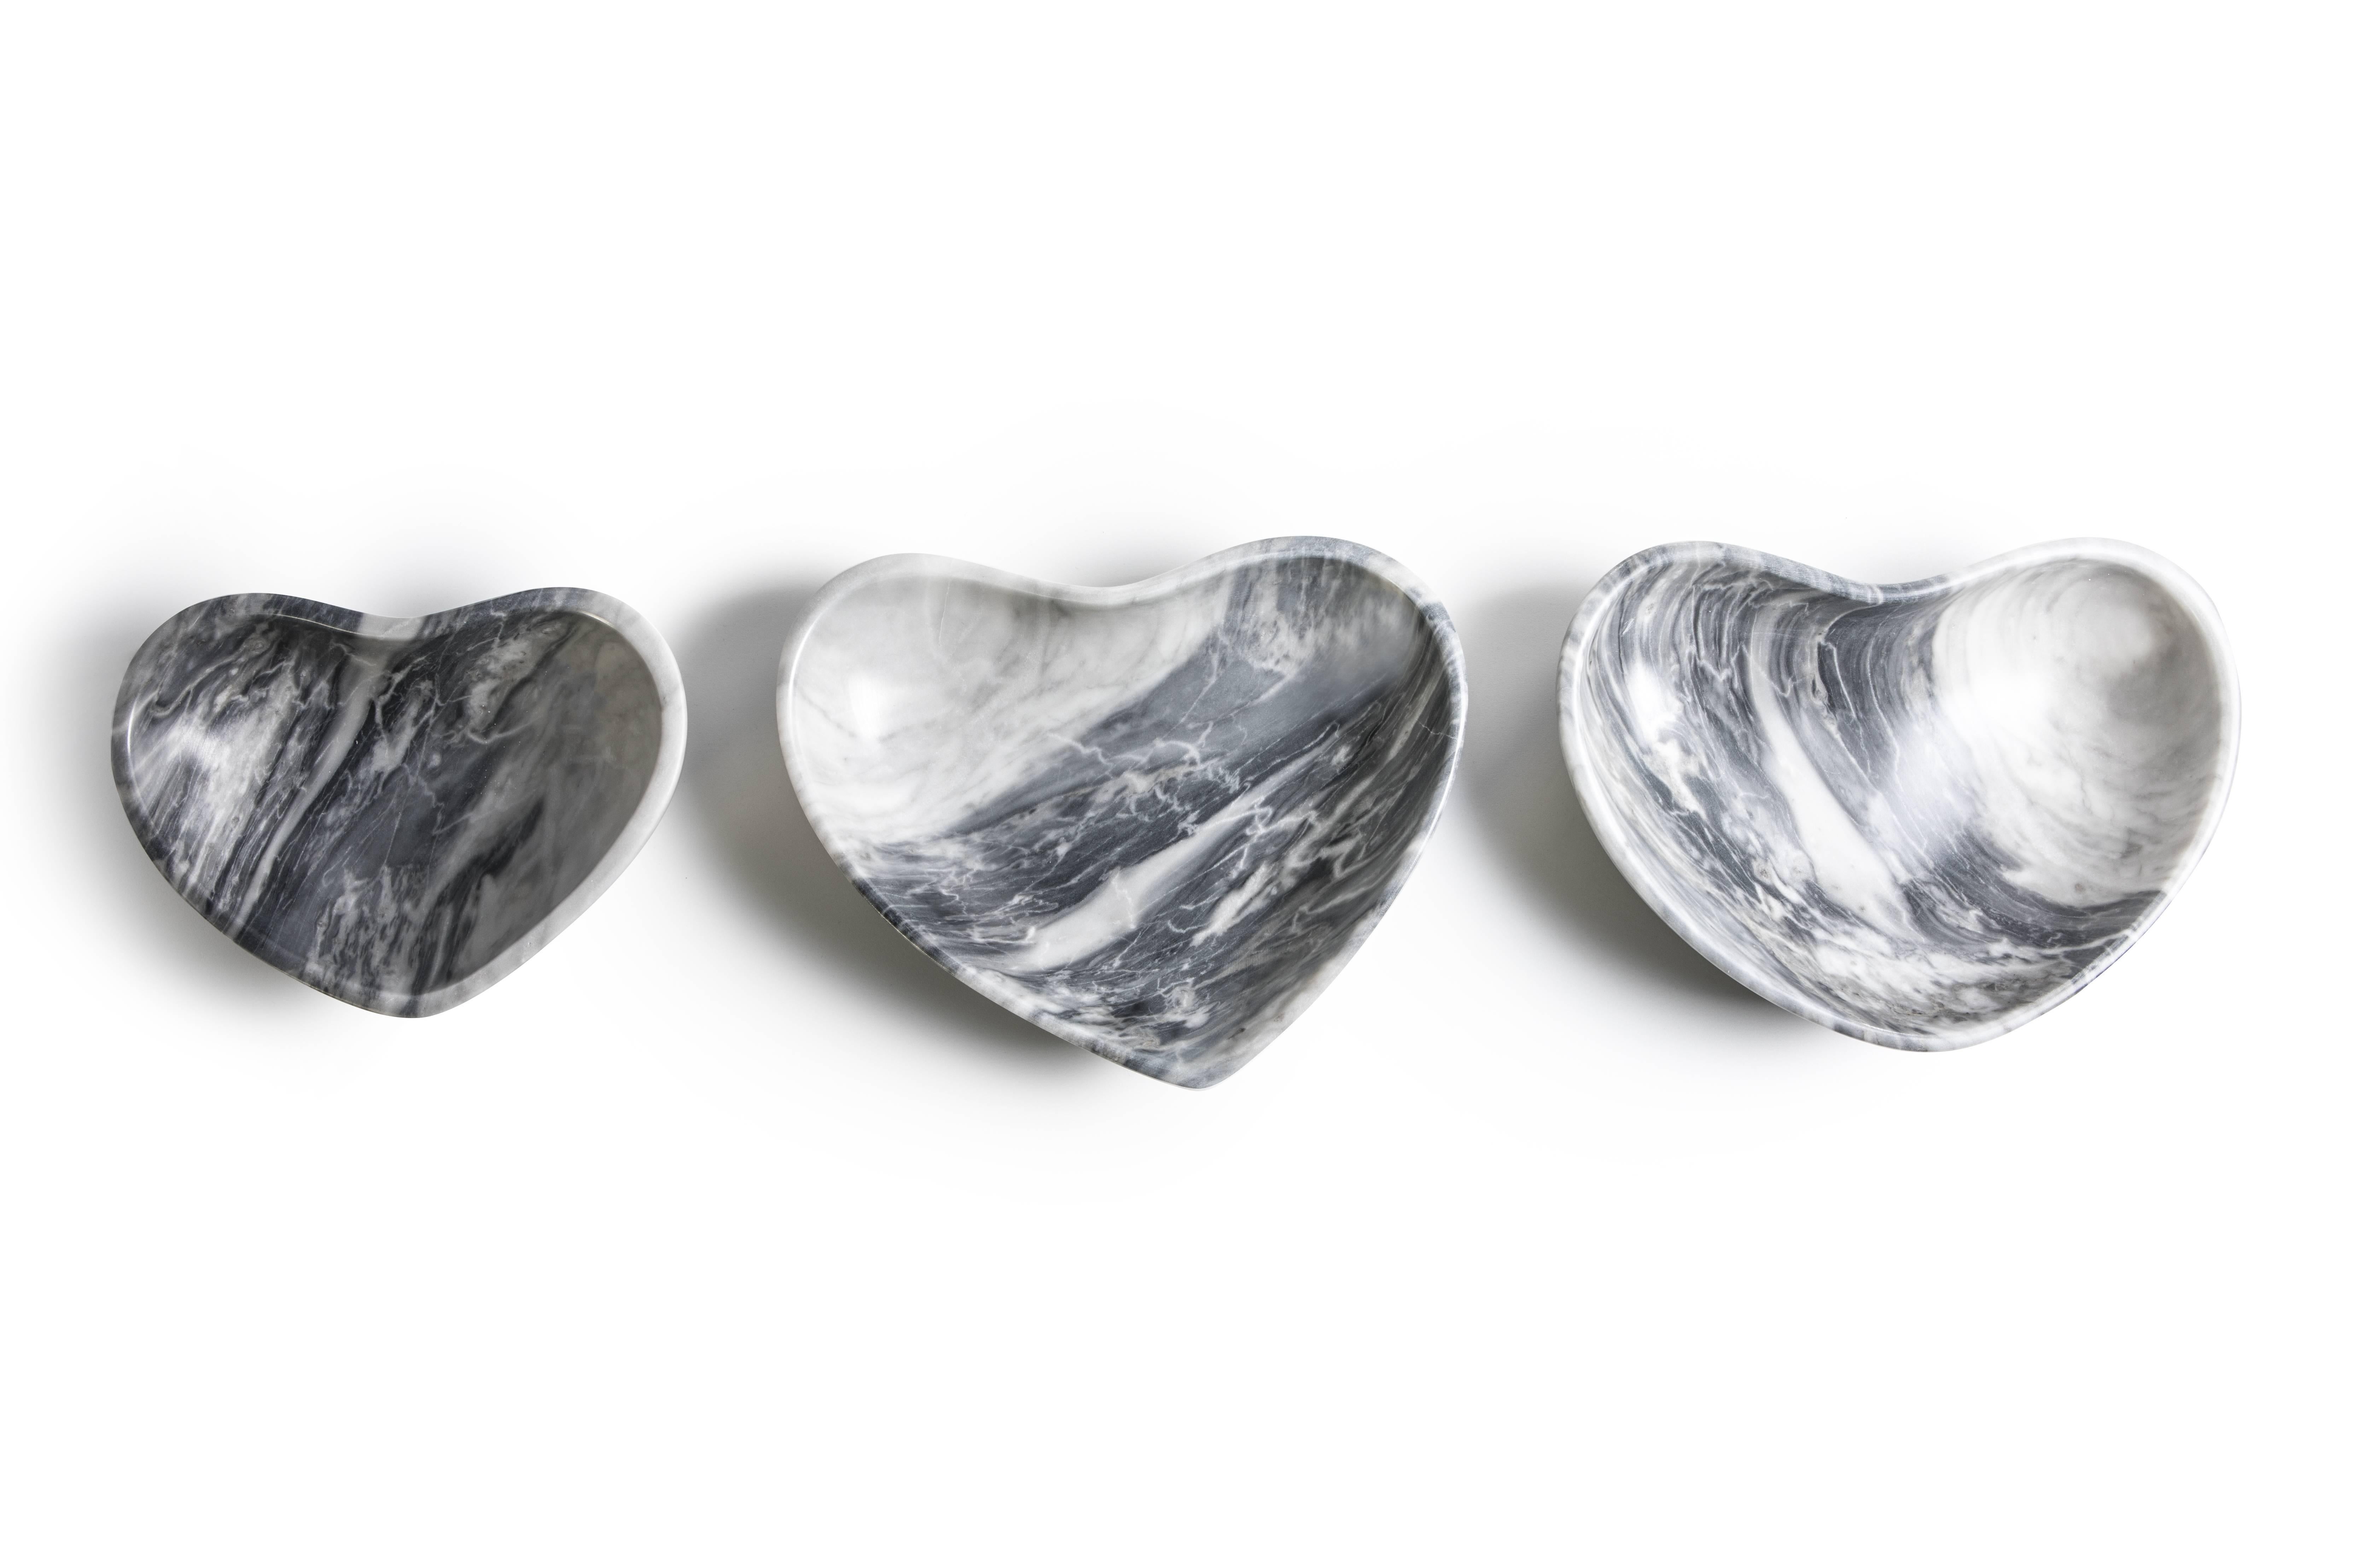 Small bowl in grey Bardiglio marble with the shape of a heart. Each piece is in a way unique (every marble block is different in veins and shades) and handmade by Italian artisans specialized over generations in processing marble. Slight variations